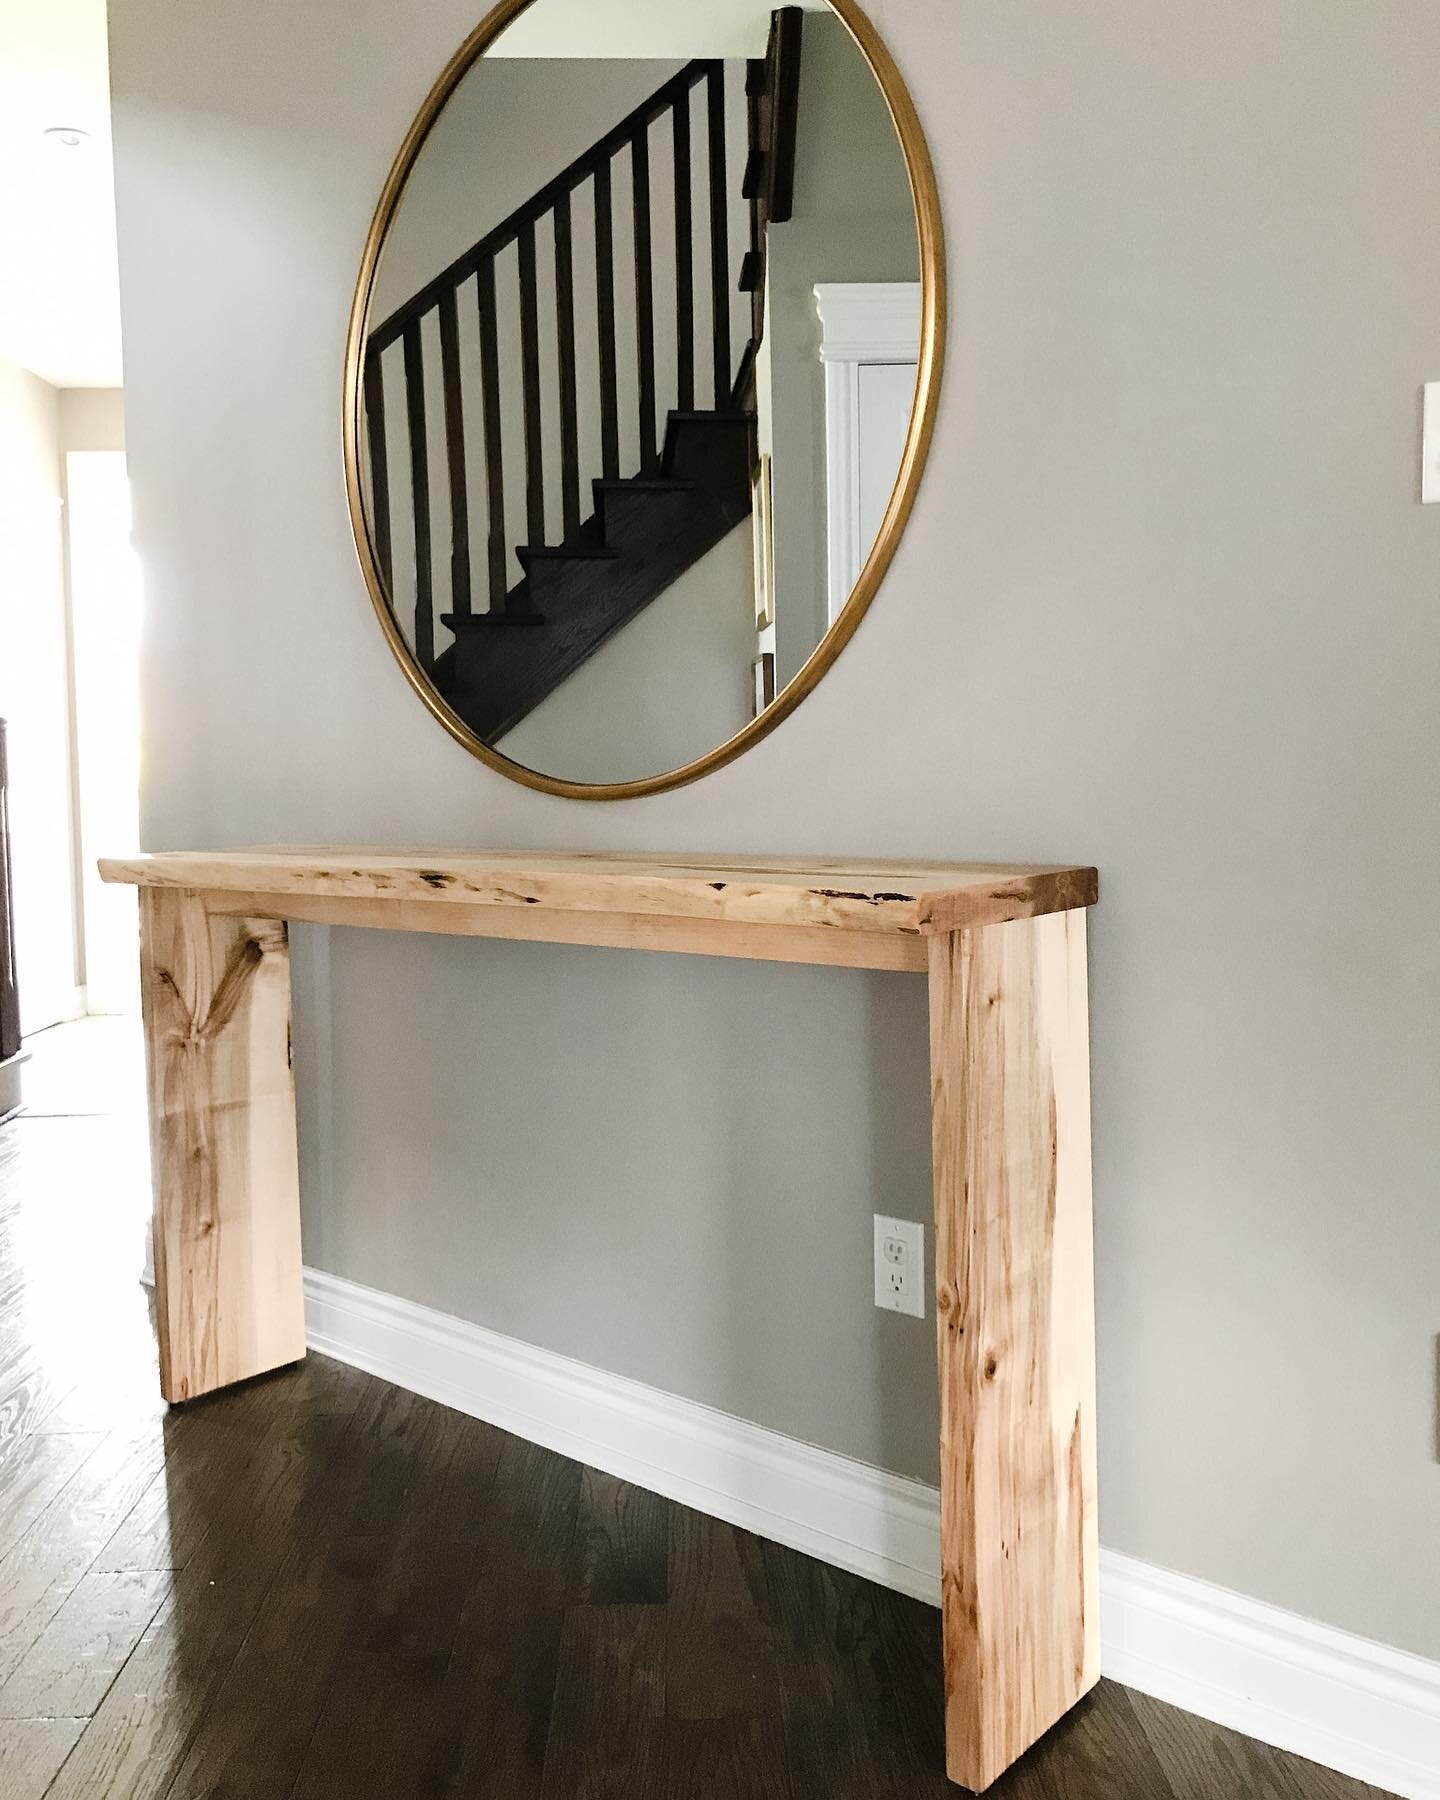 This live edge maple console was delivered this week! We love the simple design and the interesting grains of the maple wood. This table can be made to any size, and with any wood type!

#customfurniture #customfurnituredesign #woodconsole #entrywayd